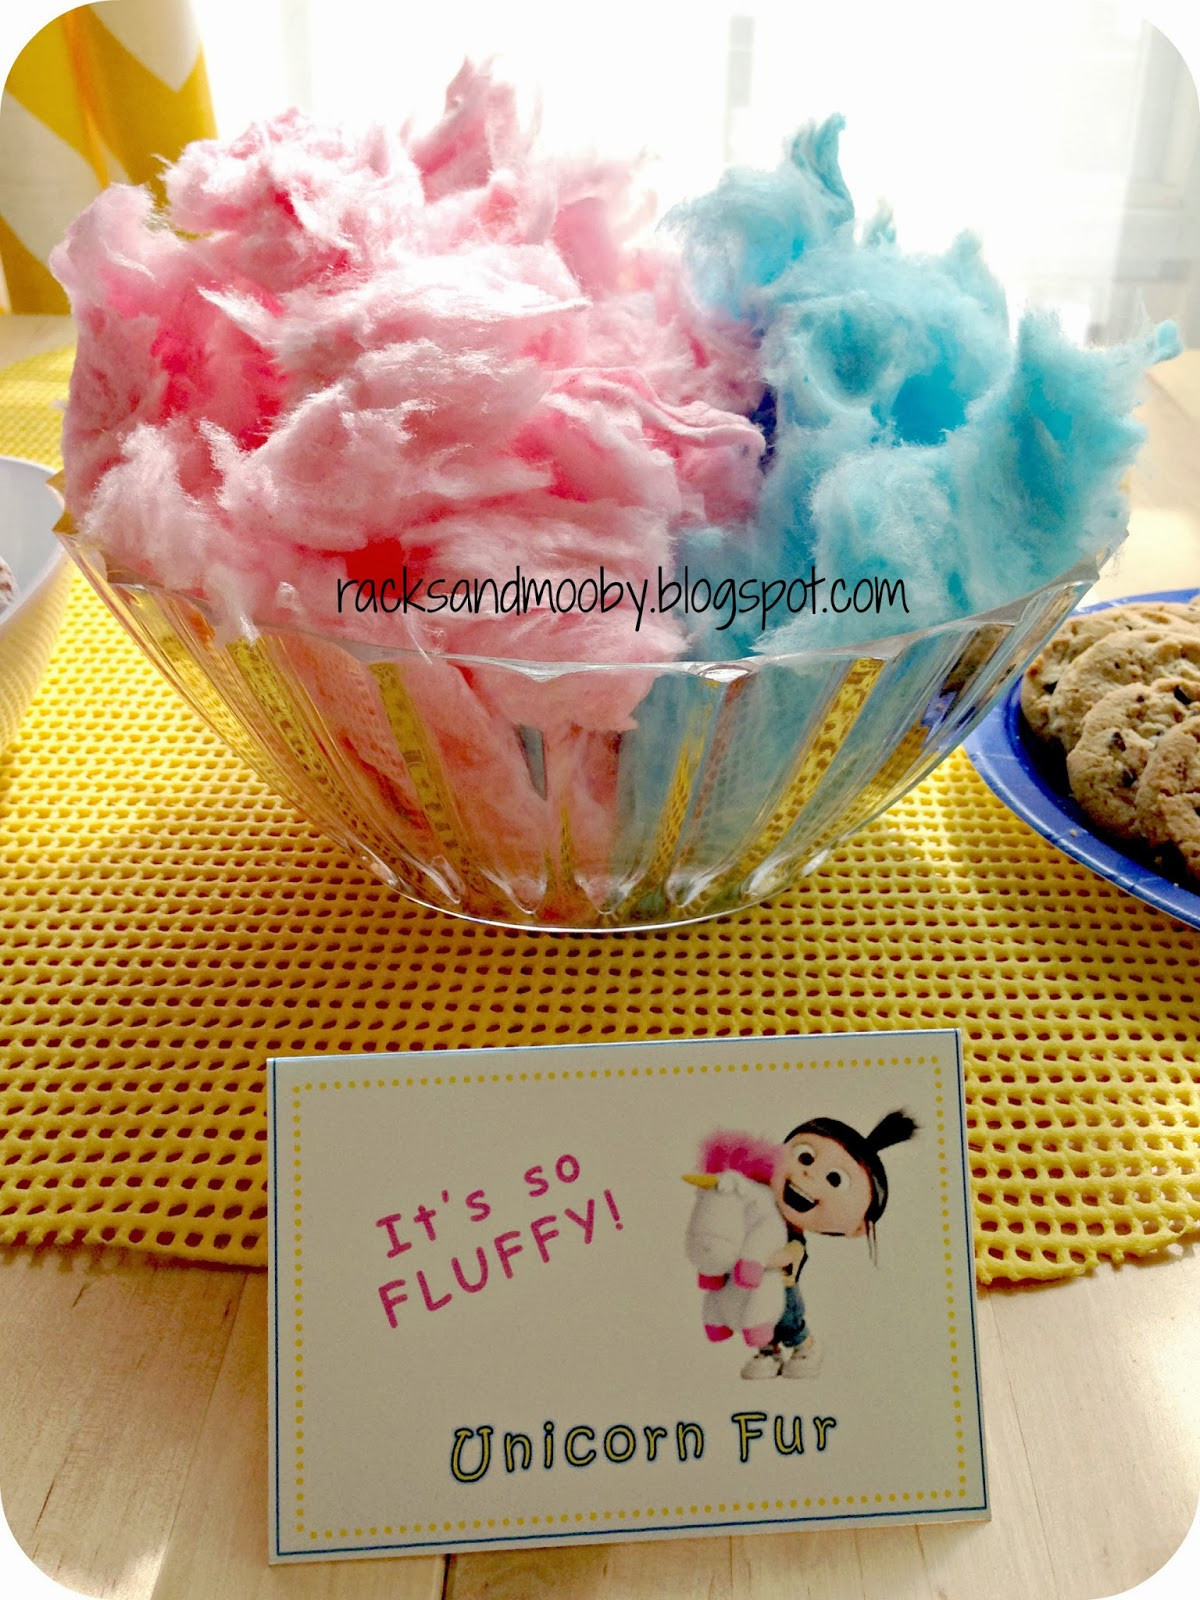 Food Ideas For Unicorn Party
 RACKS and Mooby Despicable Me Minion Party